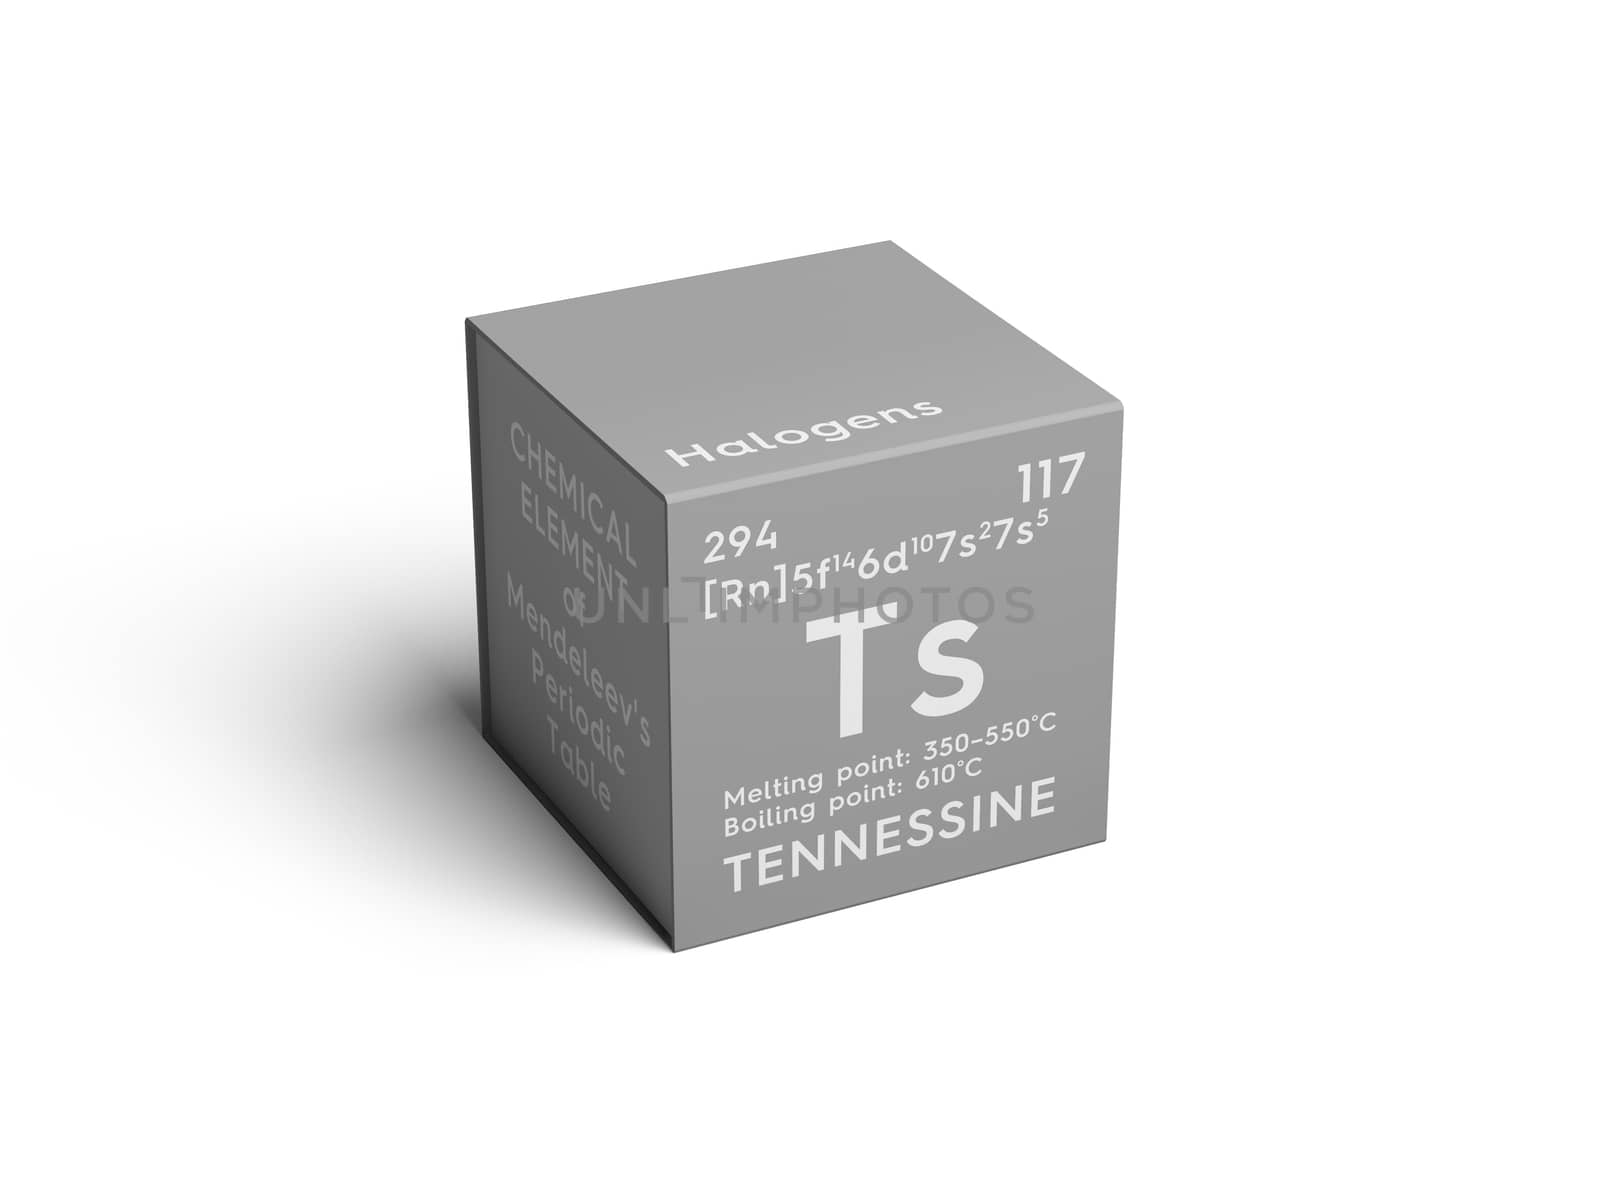 Tennessine. Halogens. Chemical Element of Mendeleev's Periodic Table. Tennessine in square cube creative concept. 3D illustration.